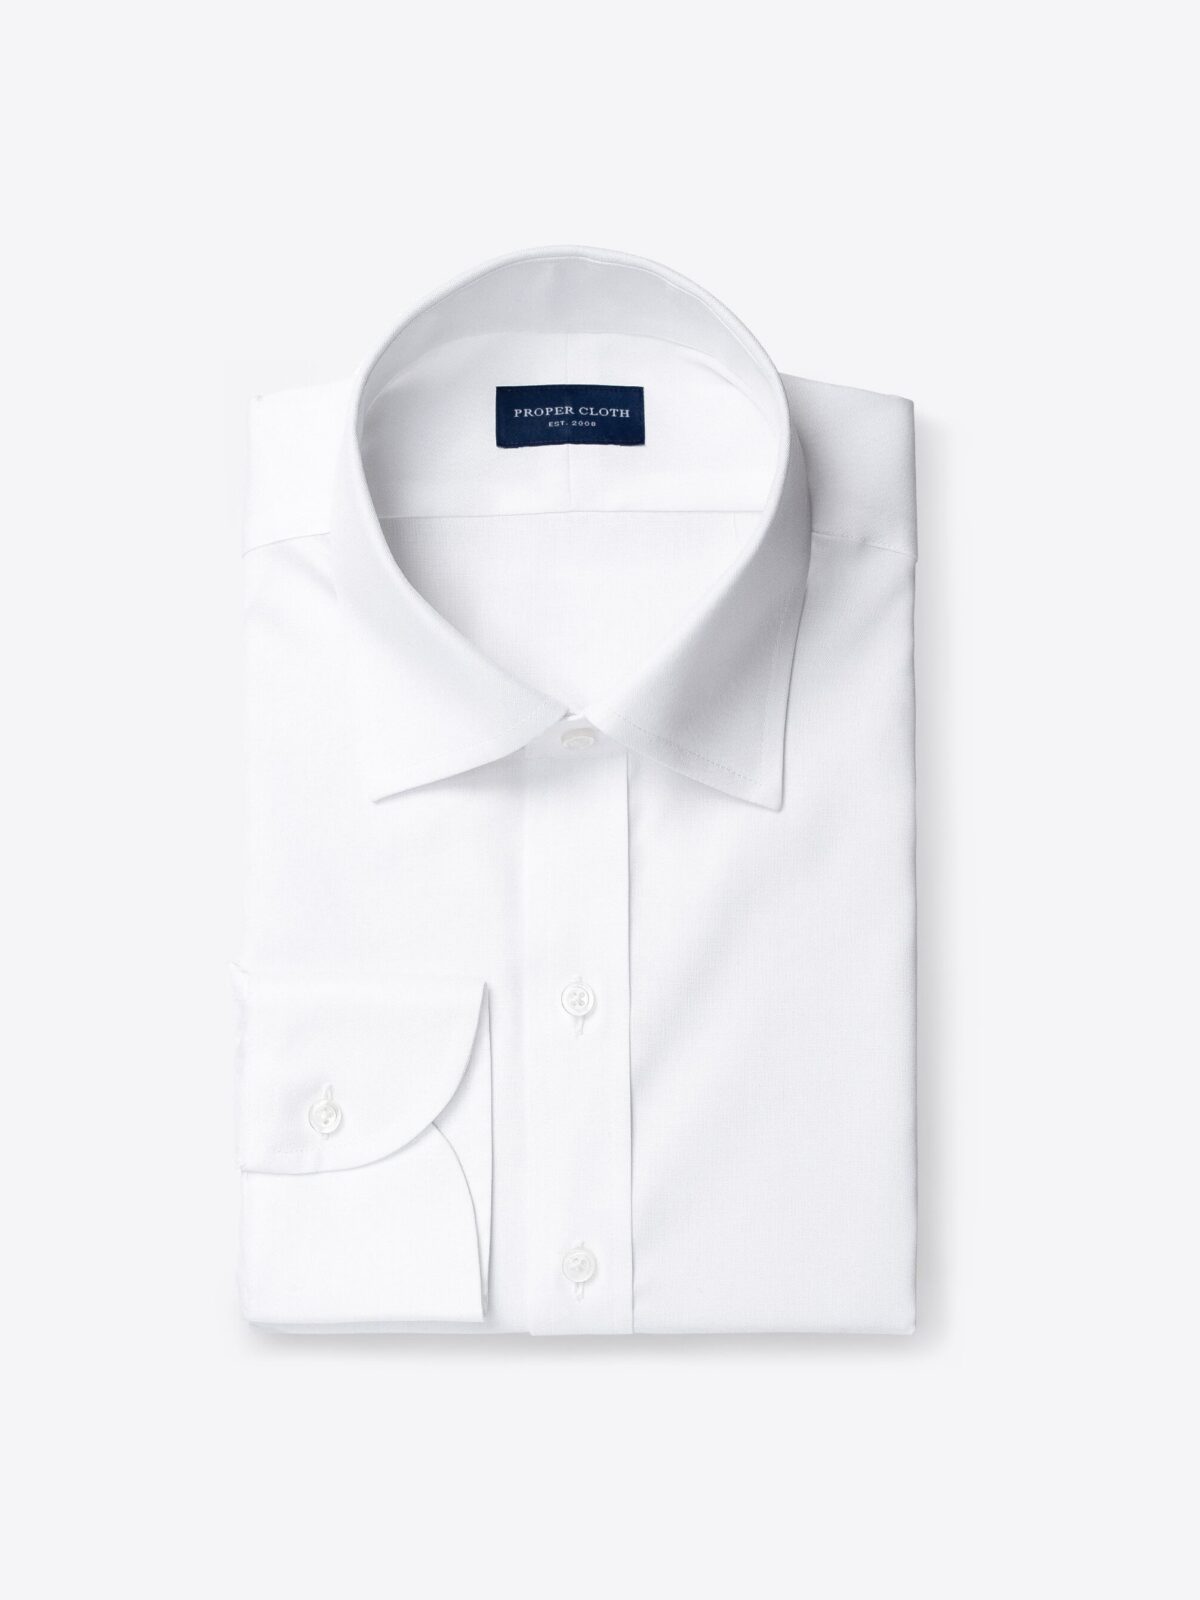 Weston White Pinpoint Fitted Dress Shirt Shirt by Proper Cloth